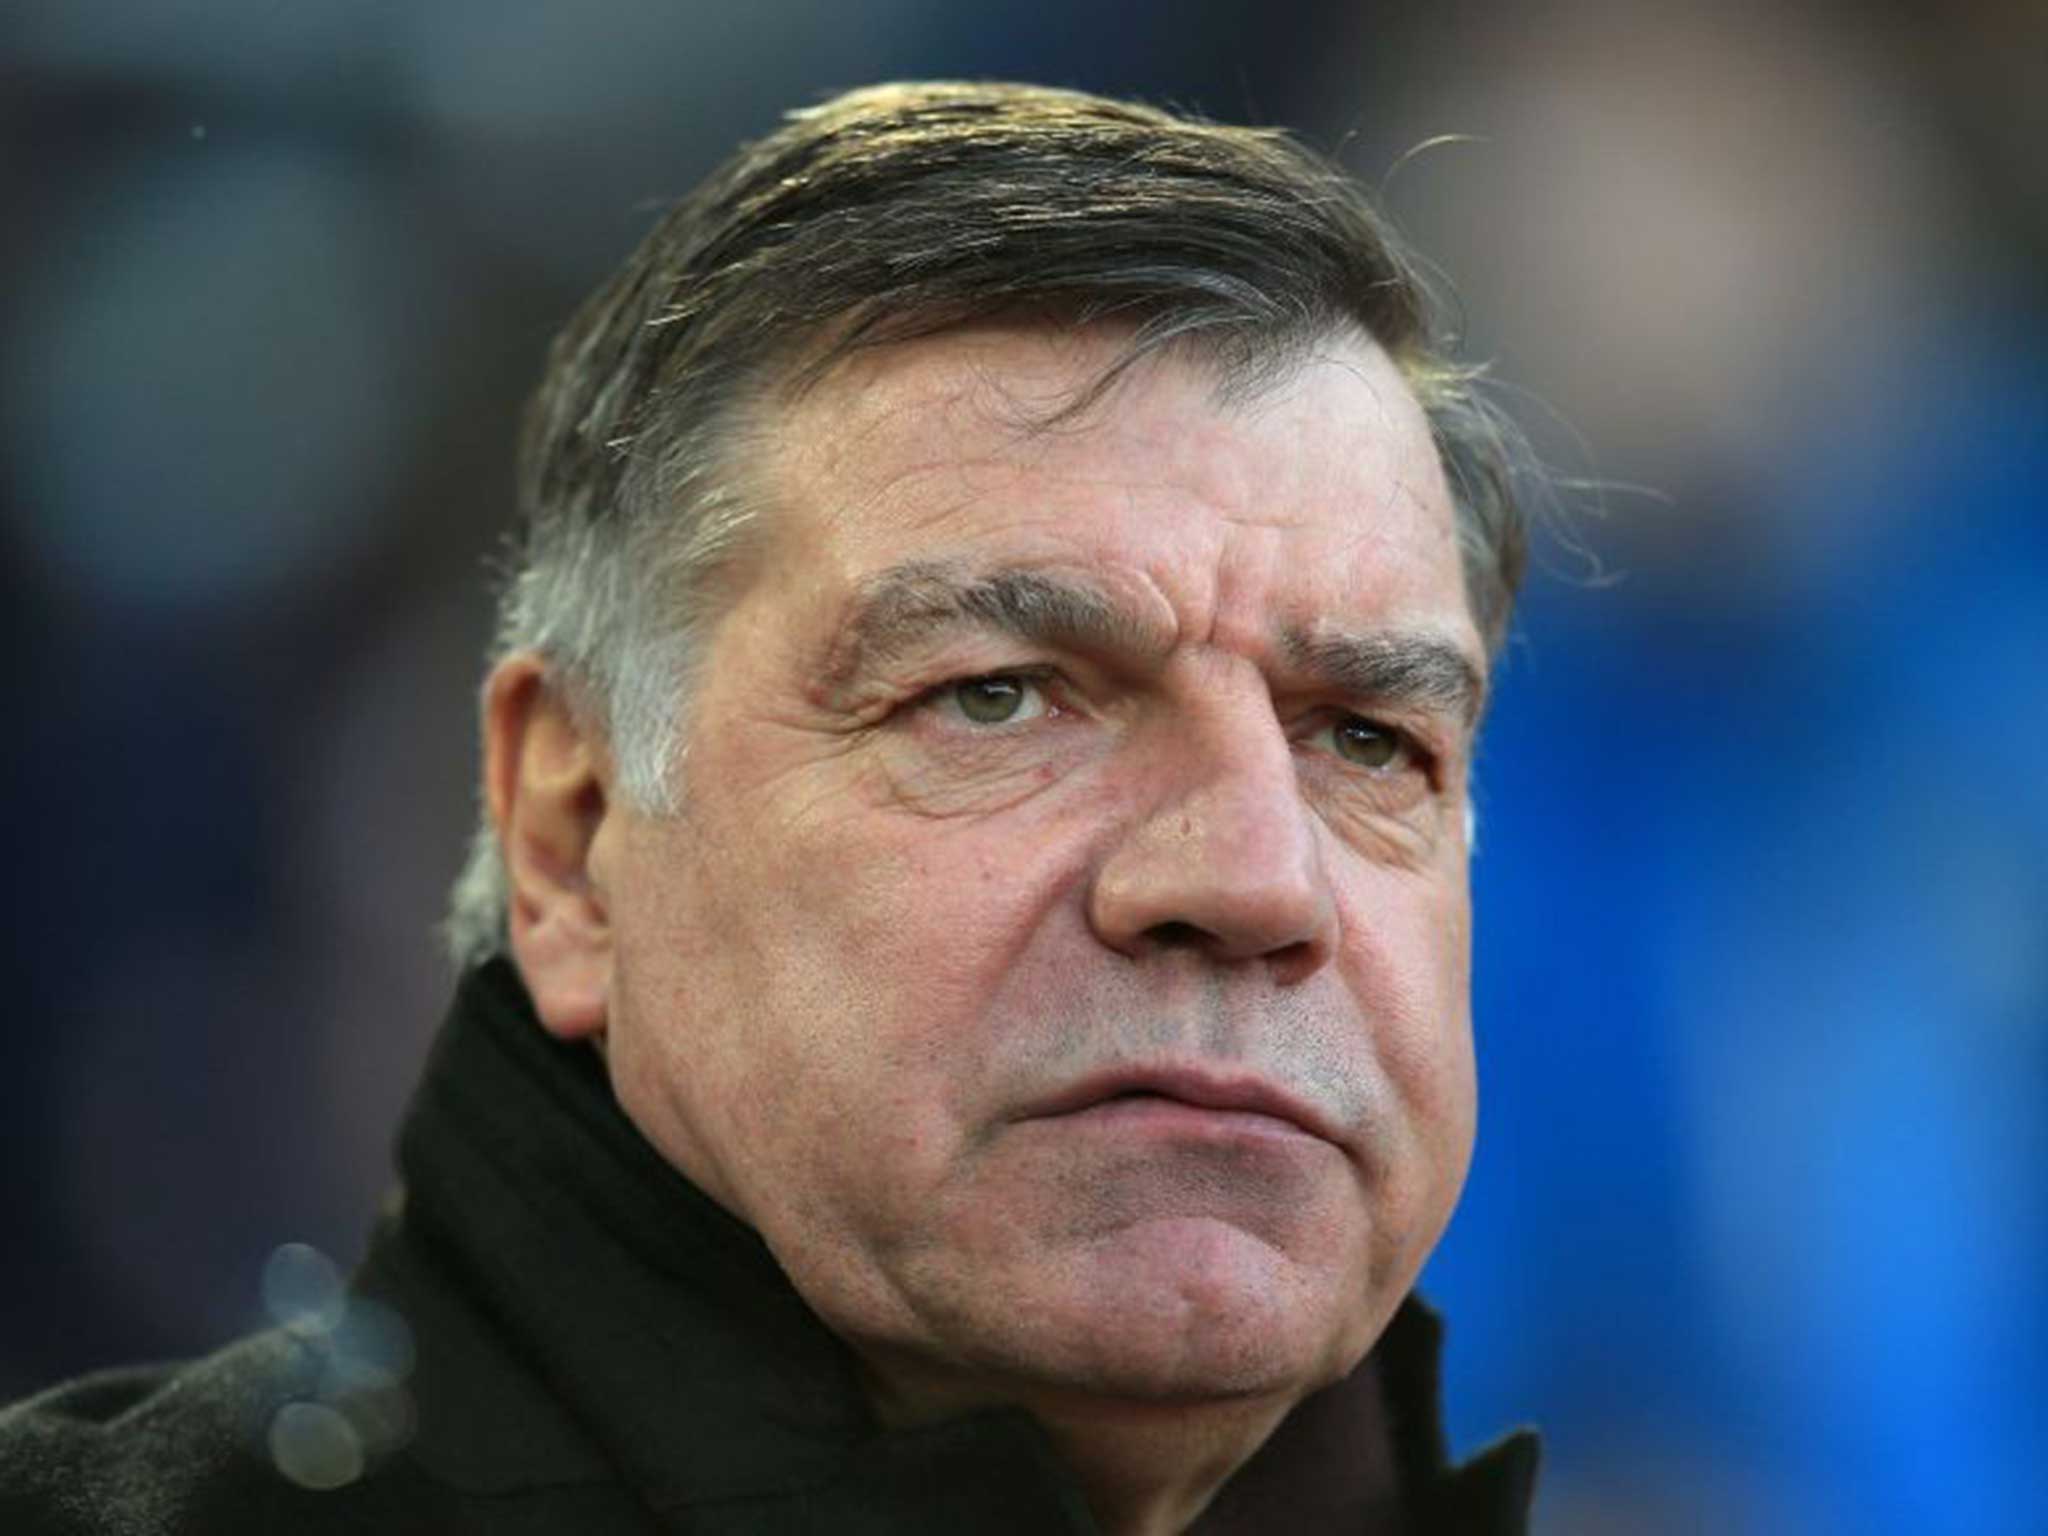 Allardyce is out of contract in the summer, leading to speculation over his long-term future at the east London club